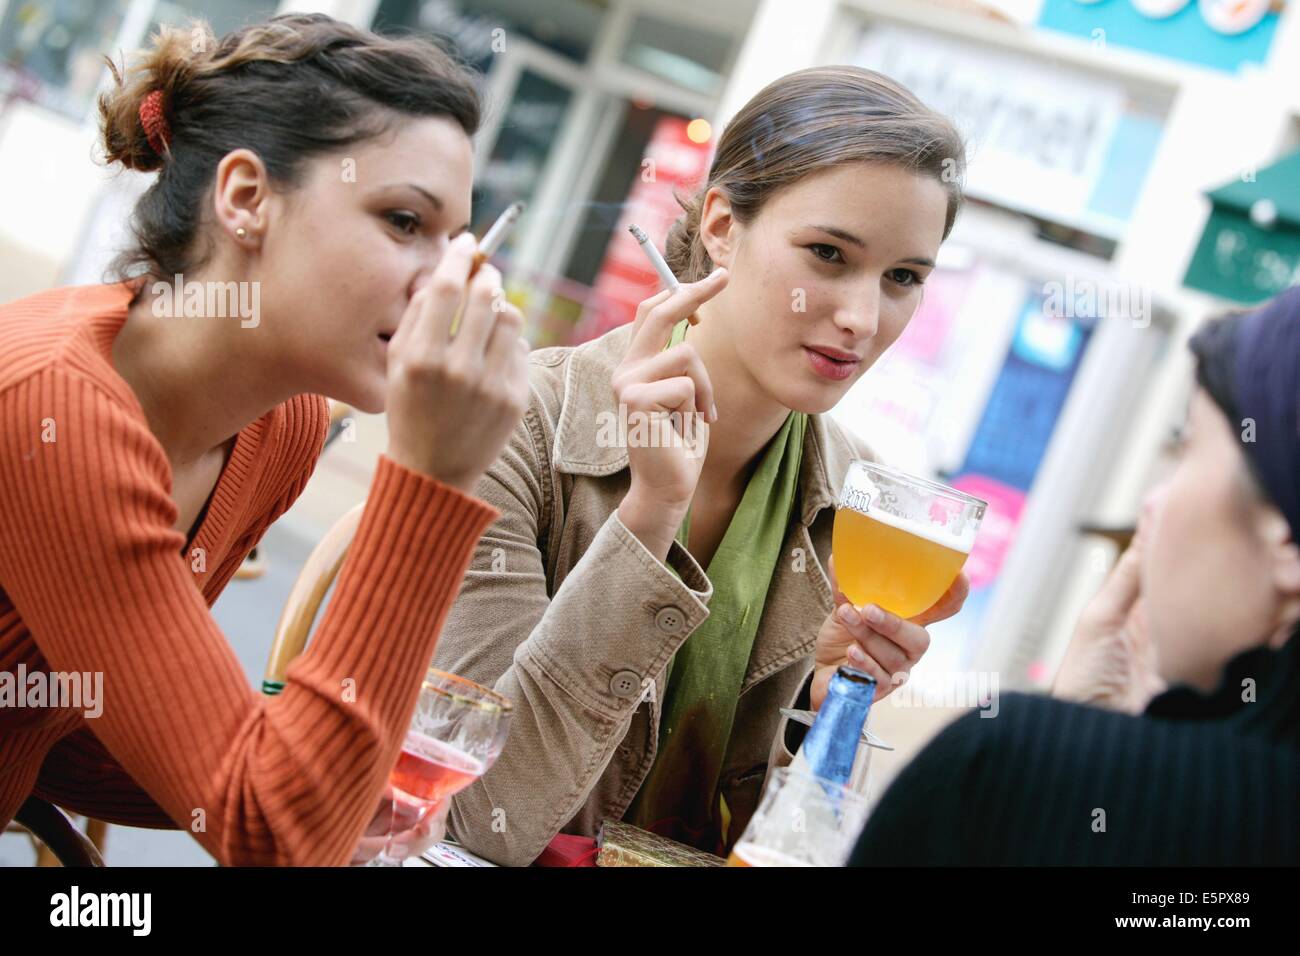 Women smoking and drinking at a terrasse. Stock Photo